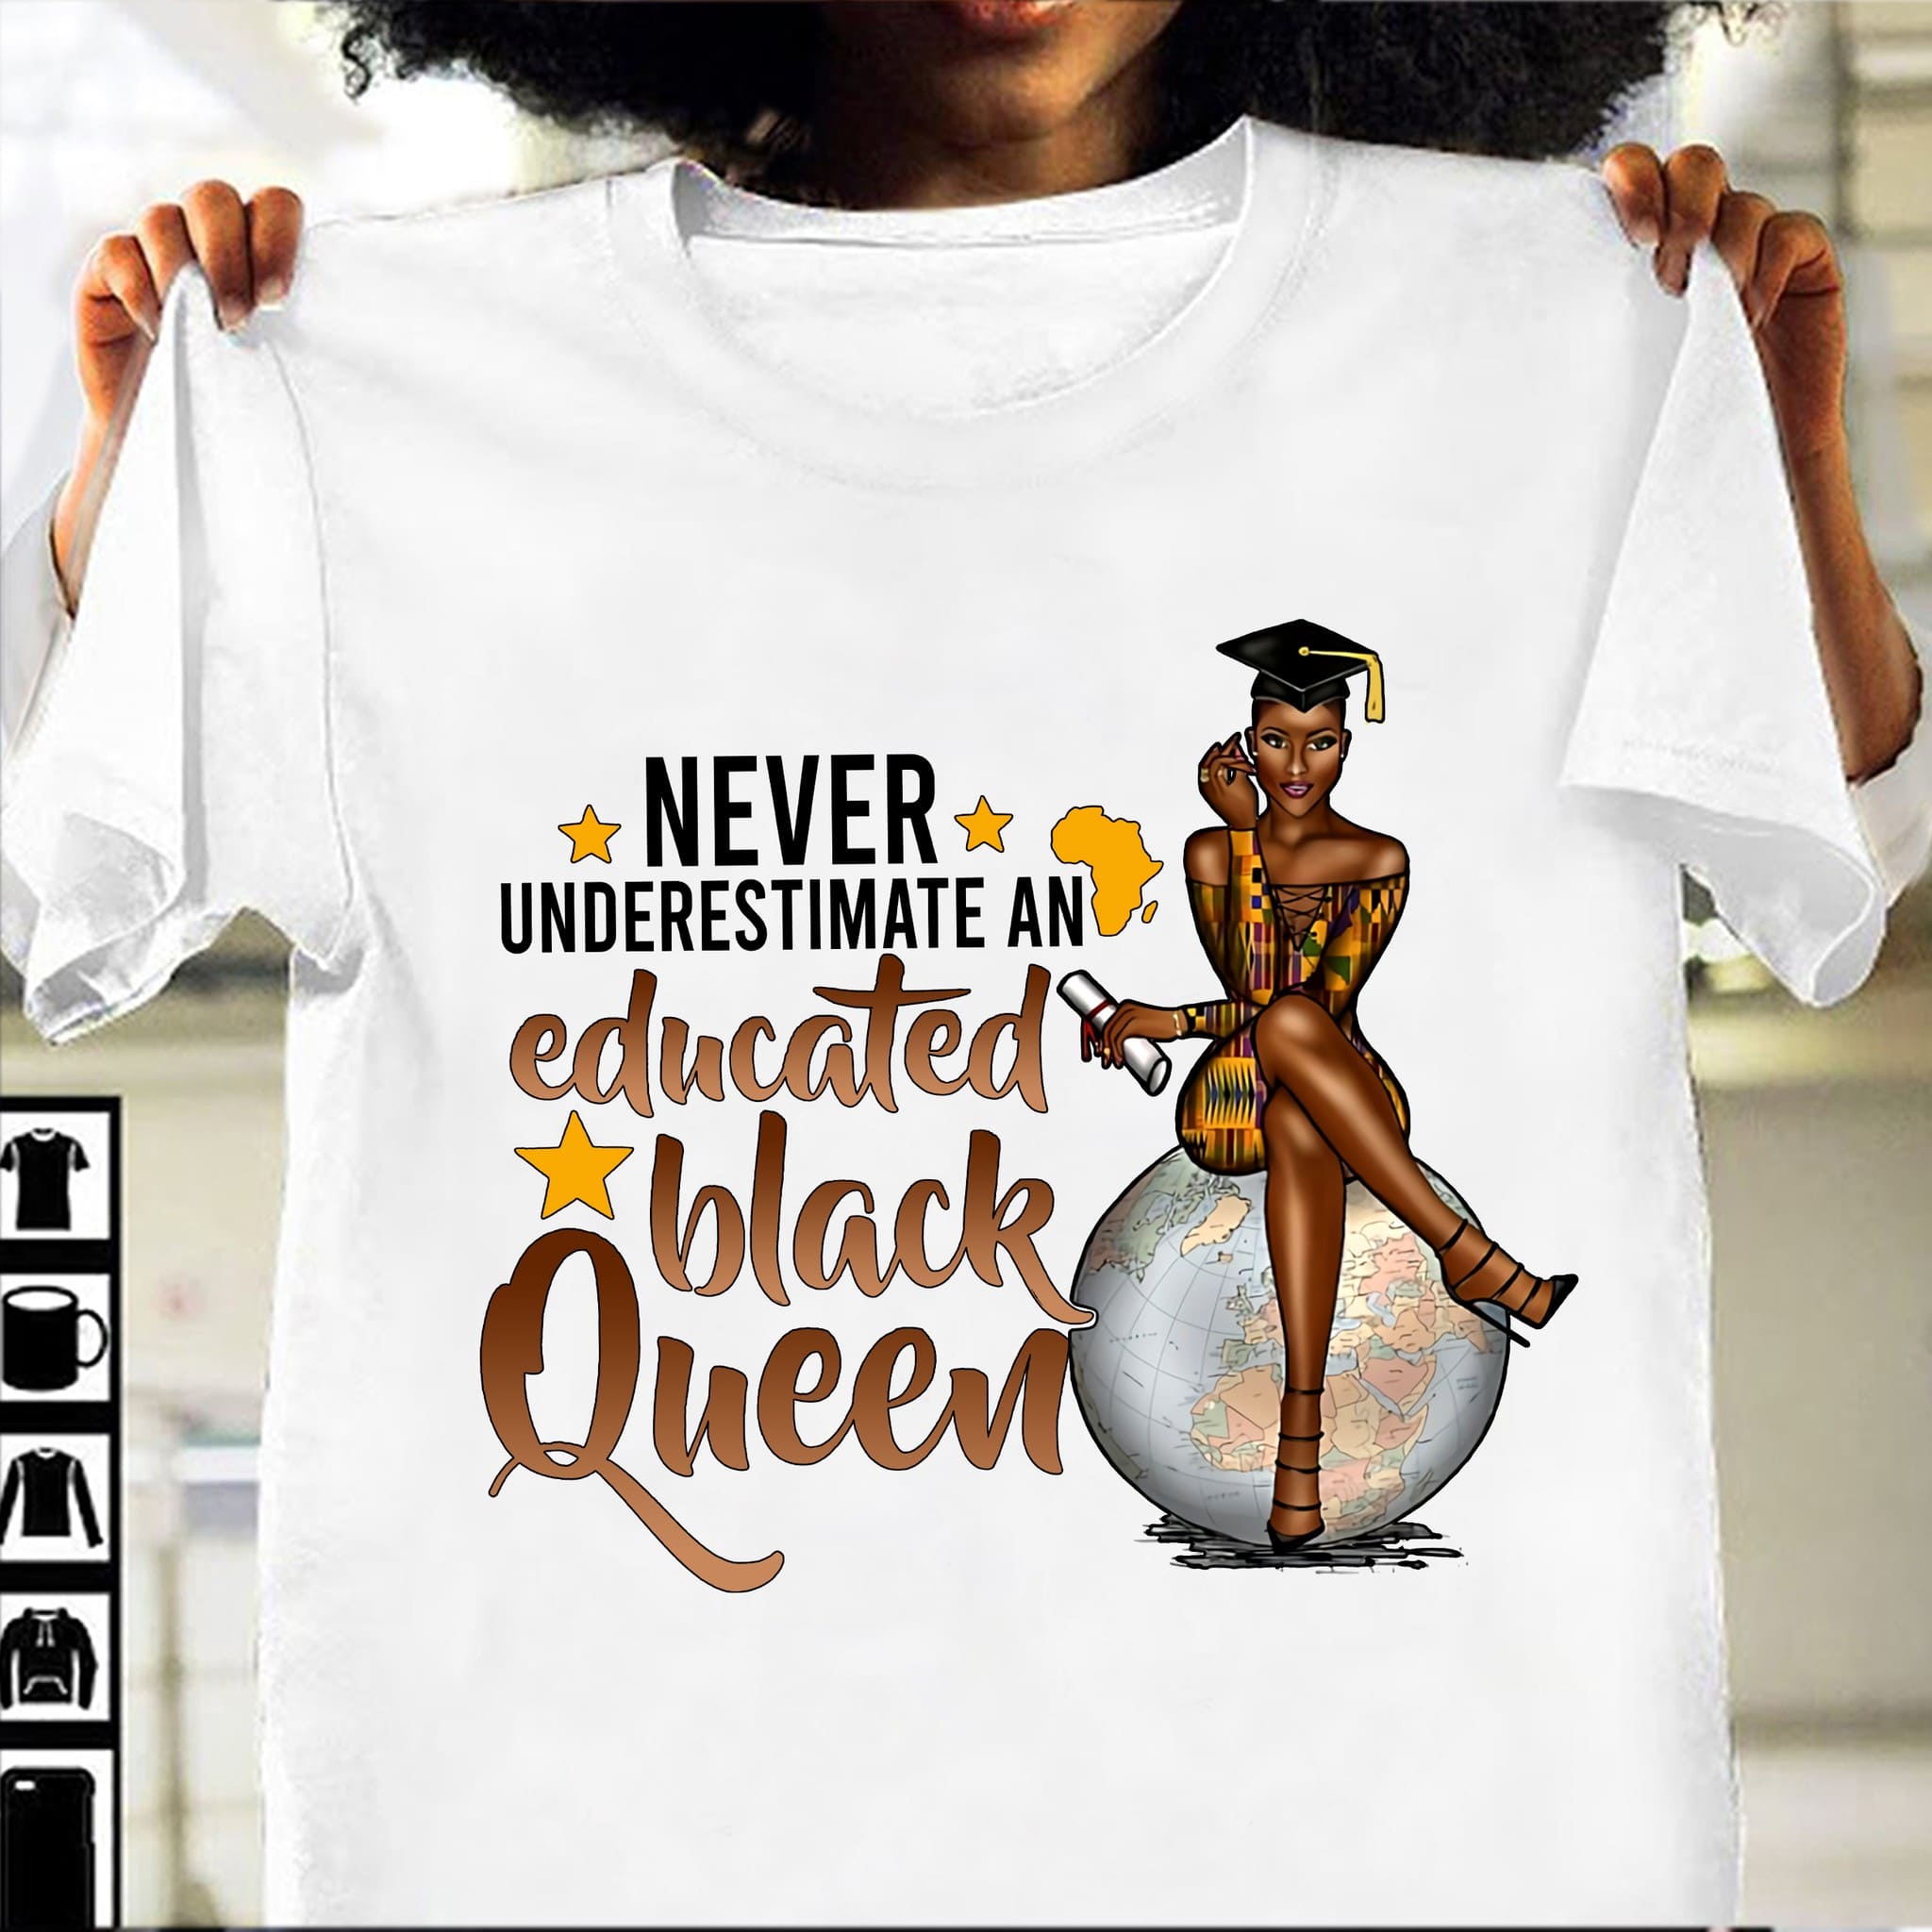 Never underestimate an educated black queen - Indigenous black woman